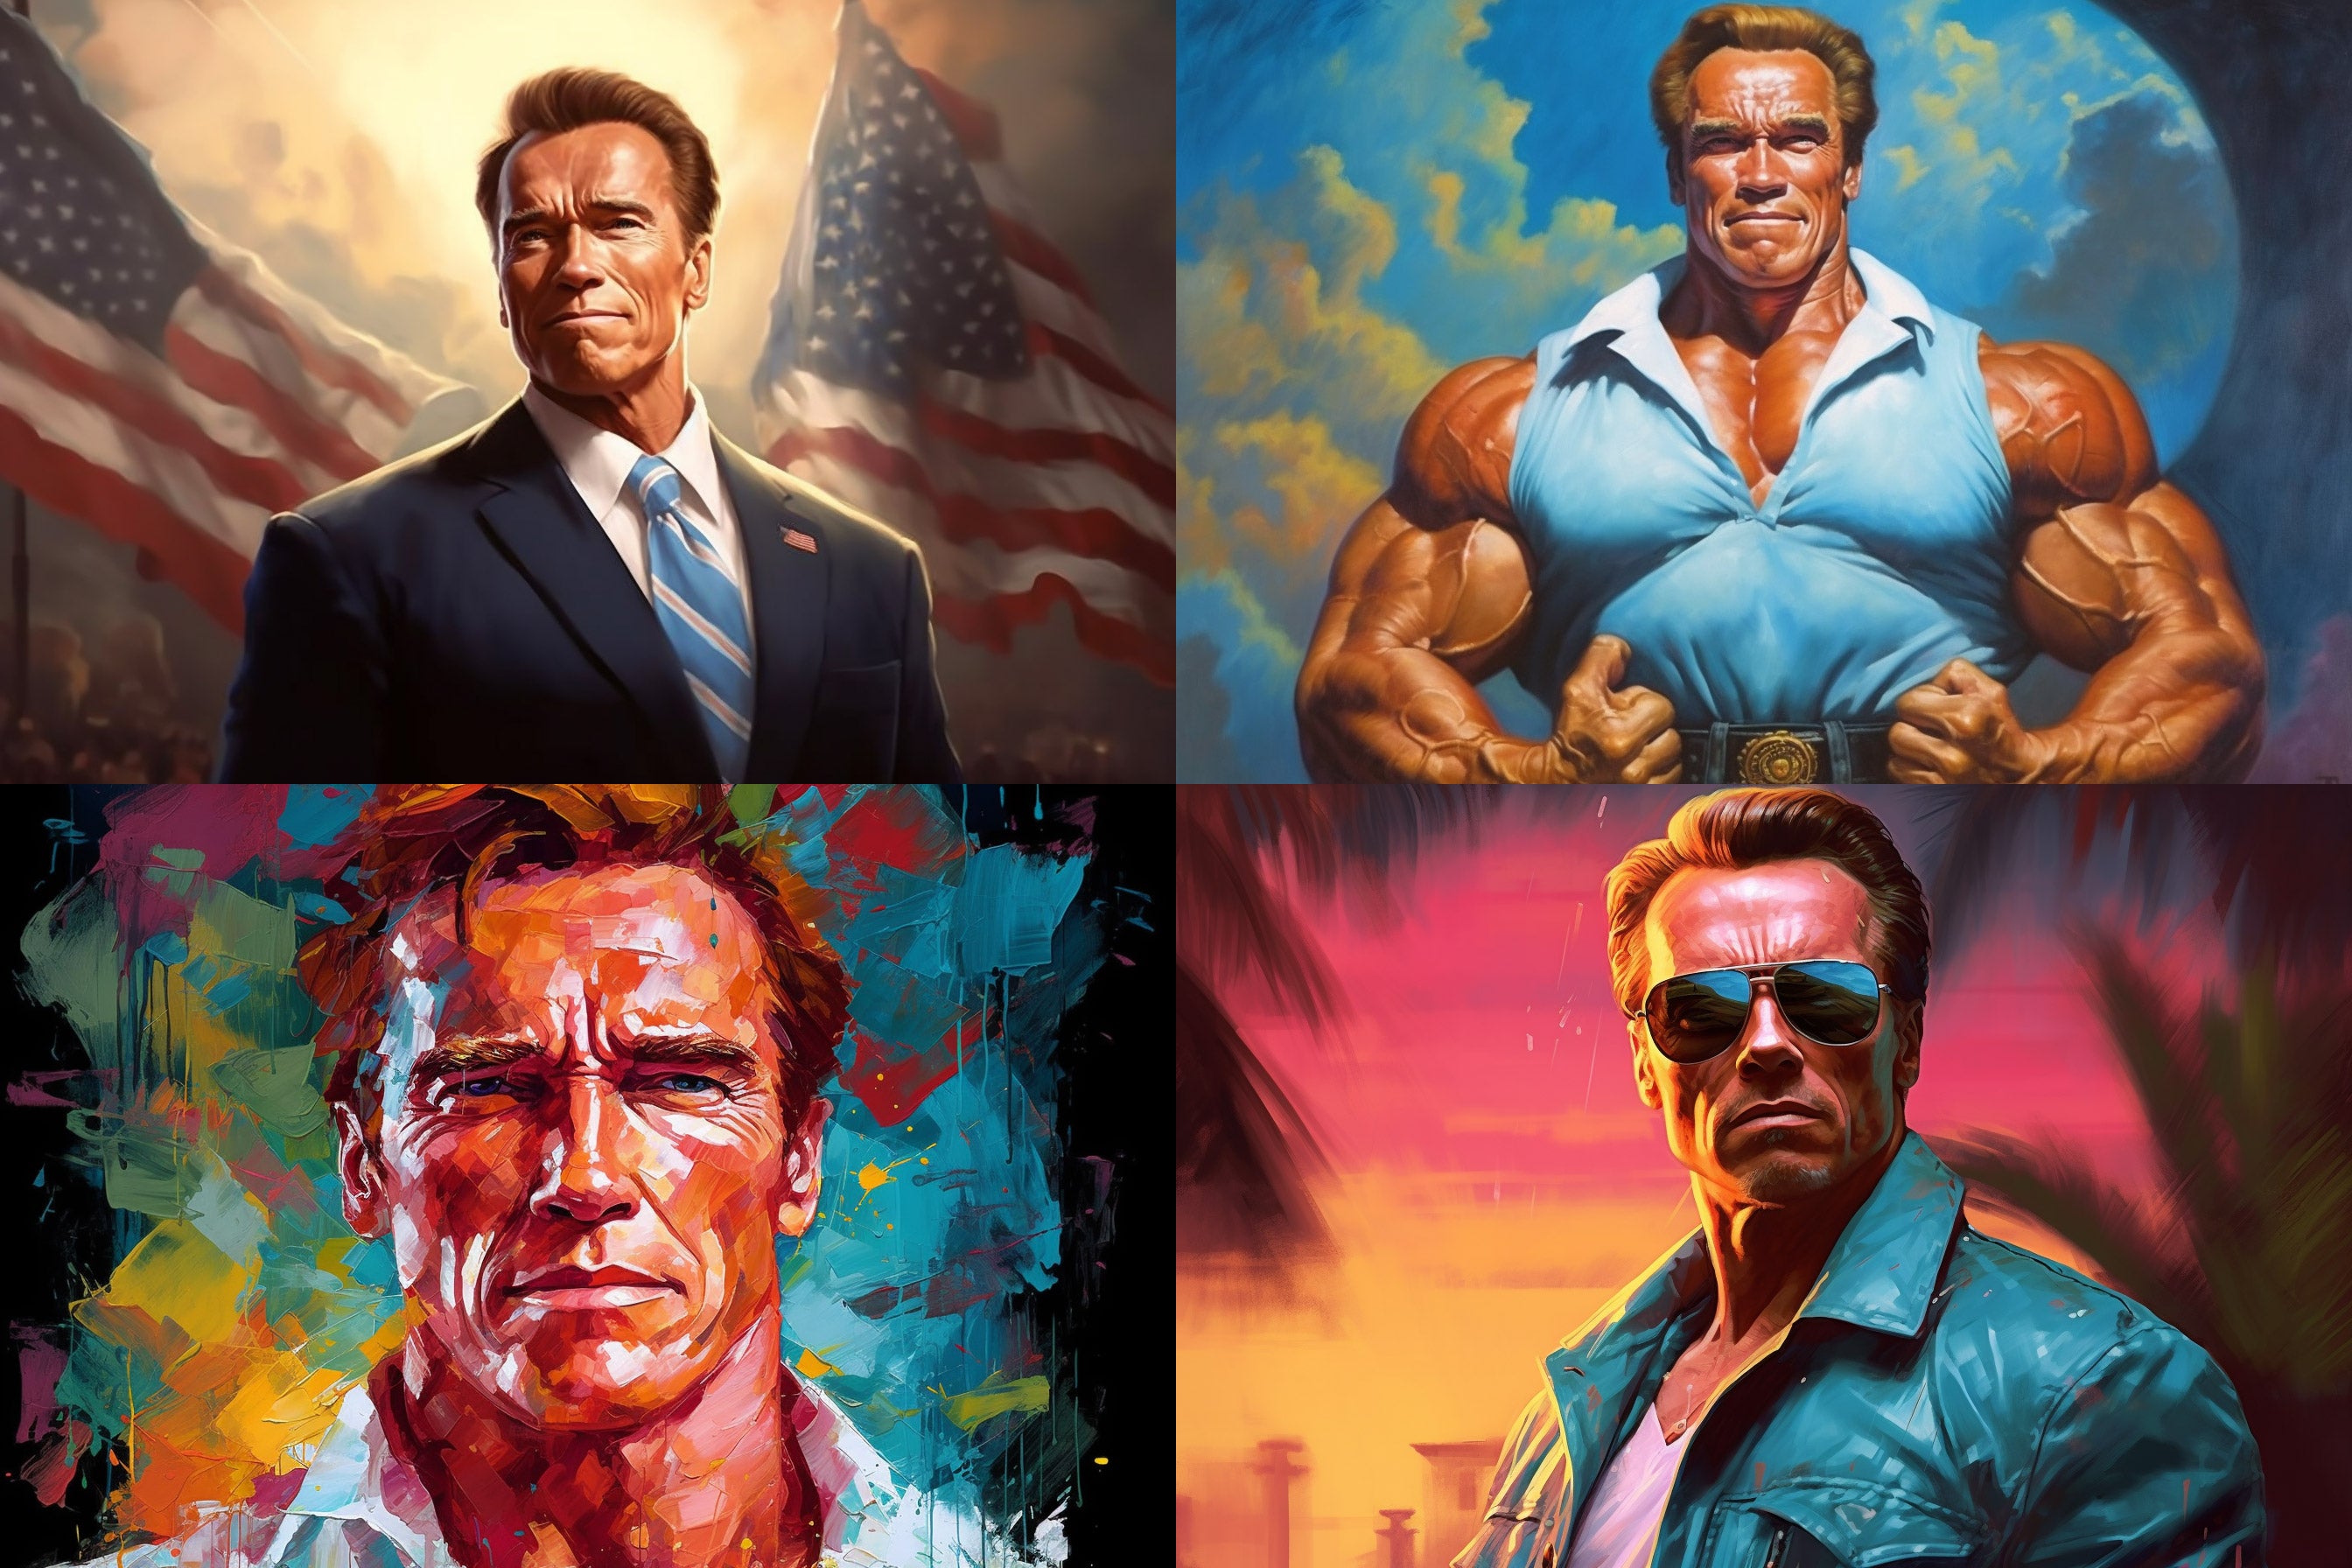 What Can We Learn from Arnold’s Career Choices